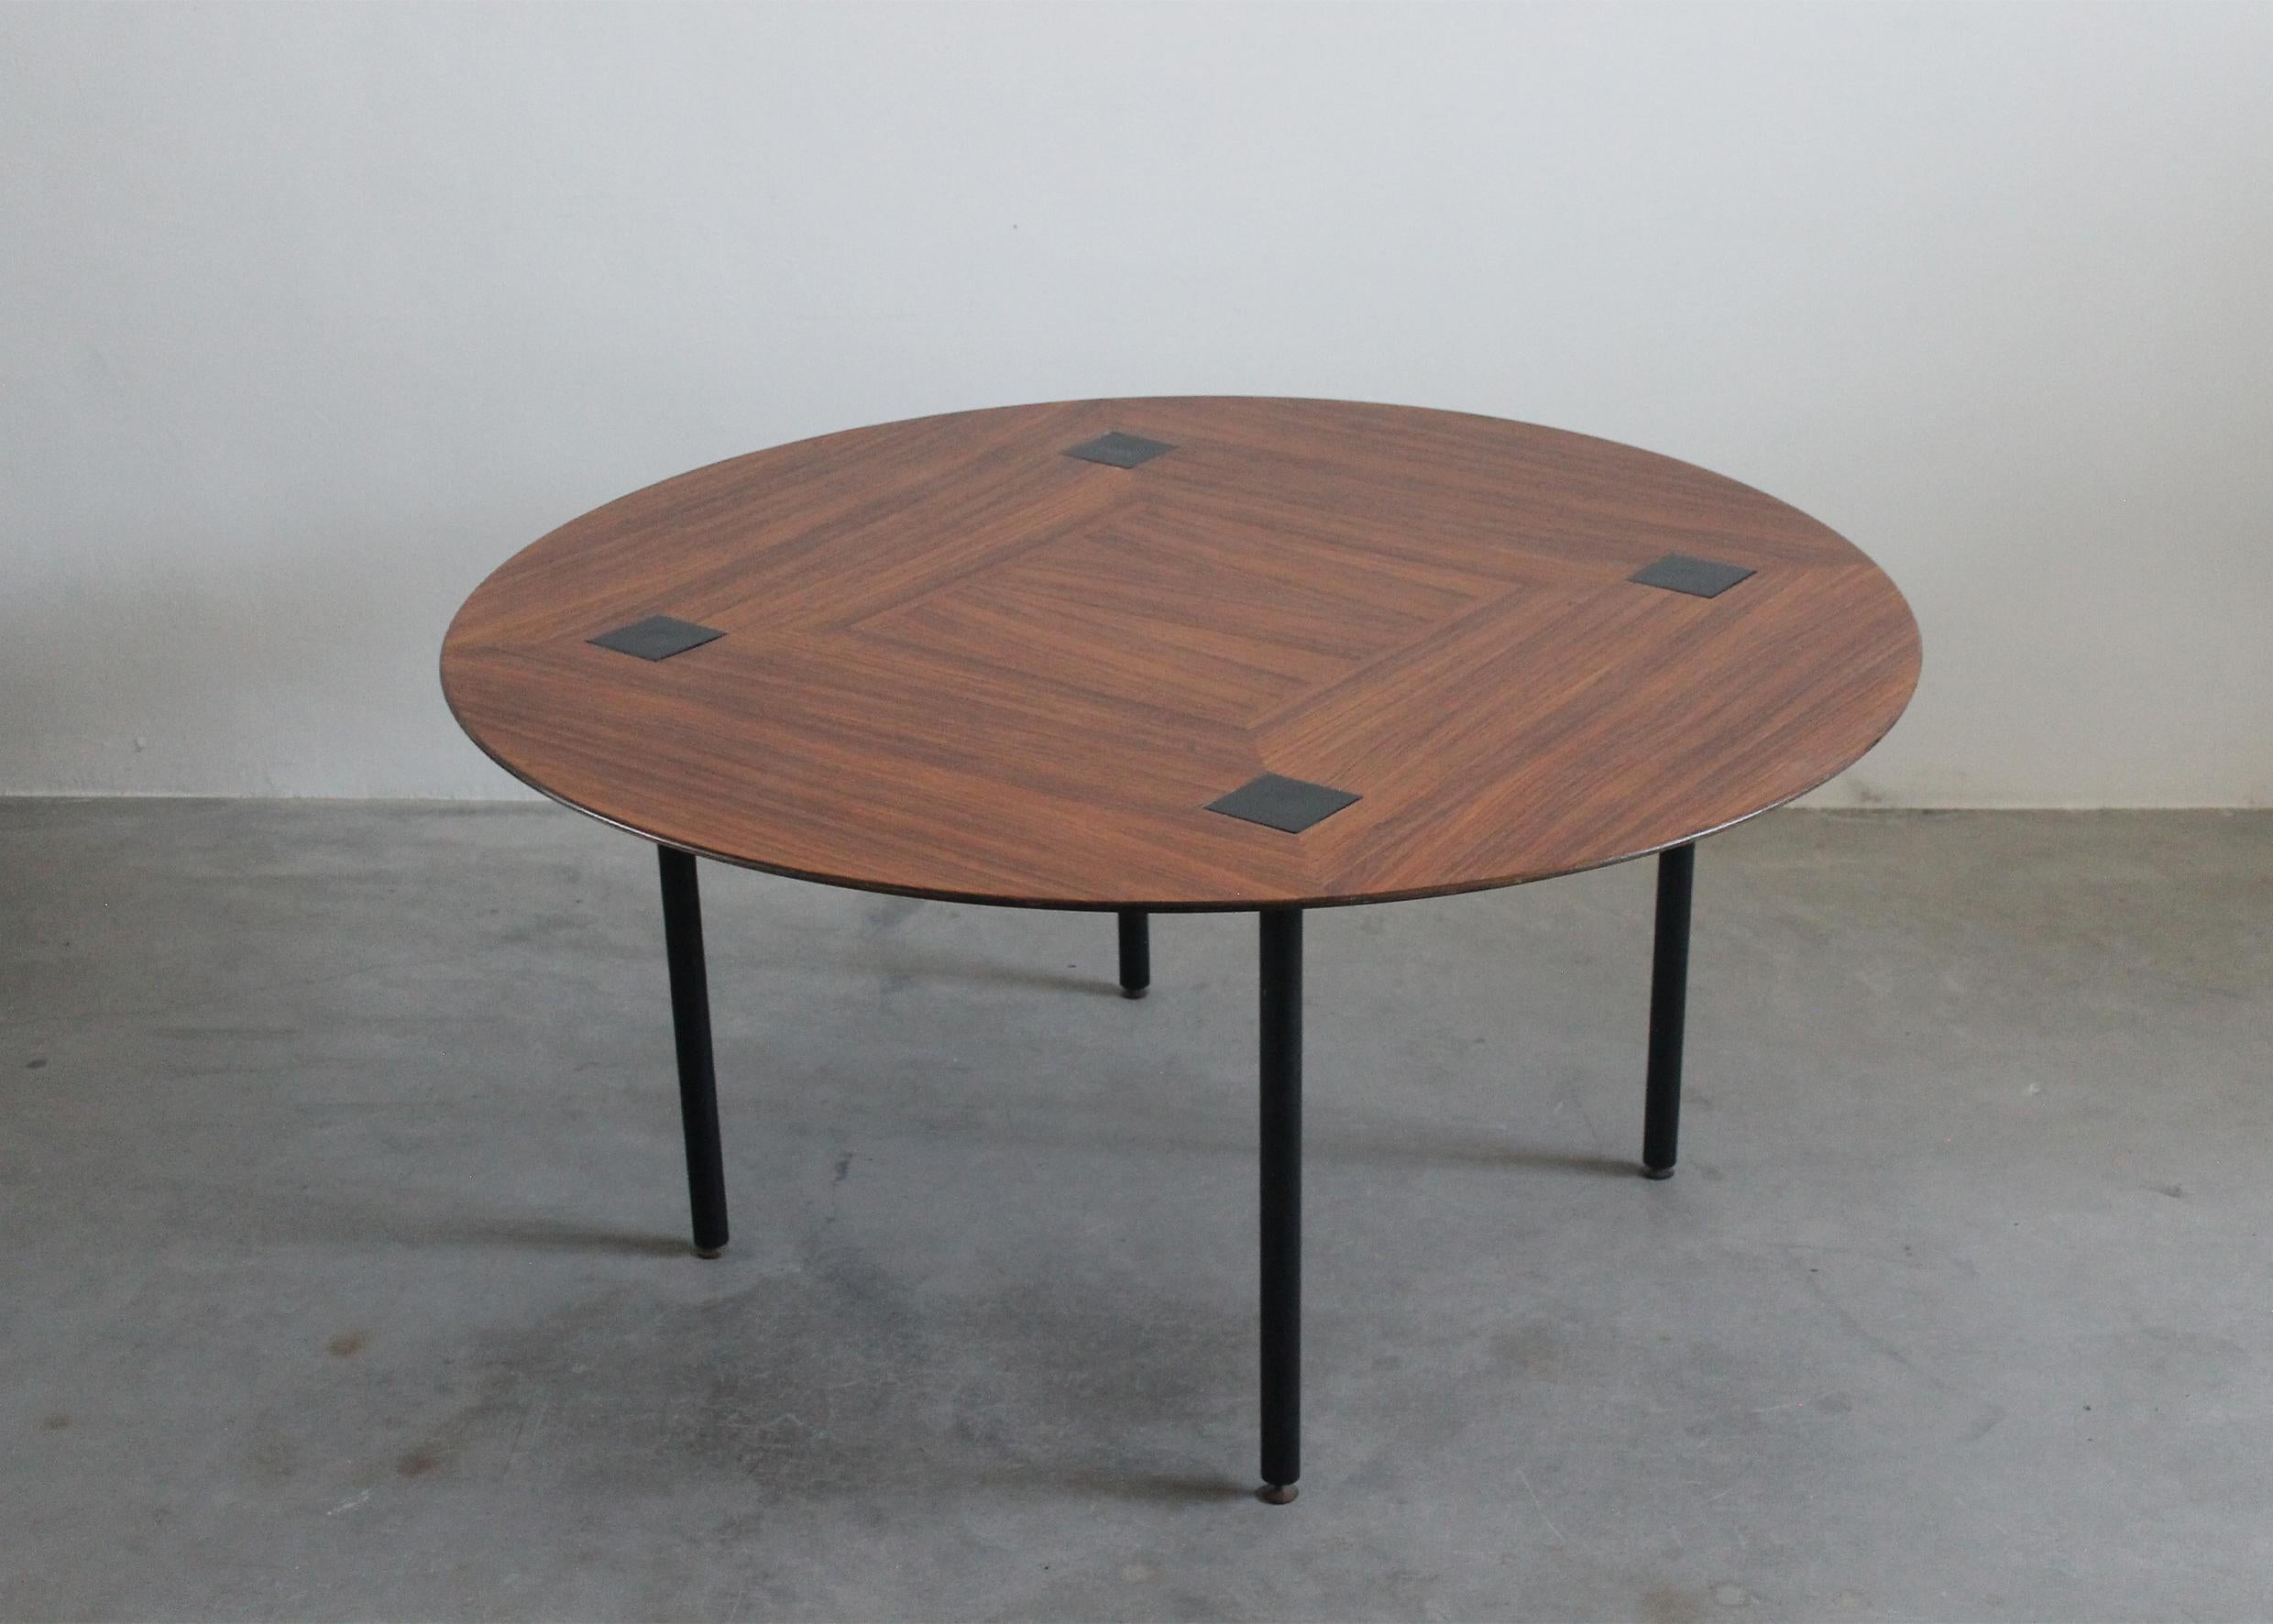 Round table model T72 in wood, black lacquered metal and brass details, designed by Ettore Sottsass and produced by Poltronova in the late 1950s.

The T72 table has a strong base made by four black lacquered metal legs. They're directly connected to